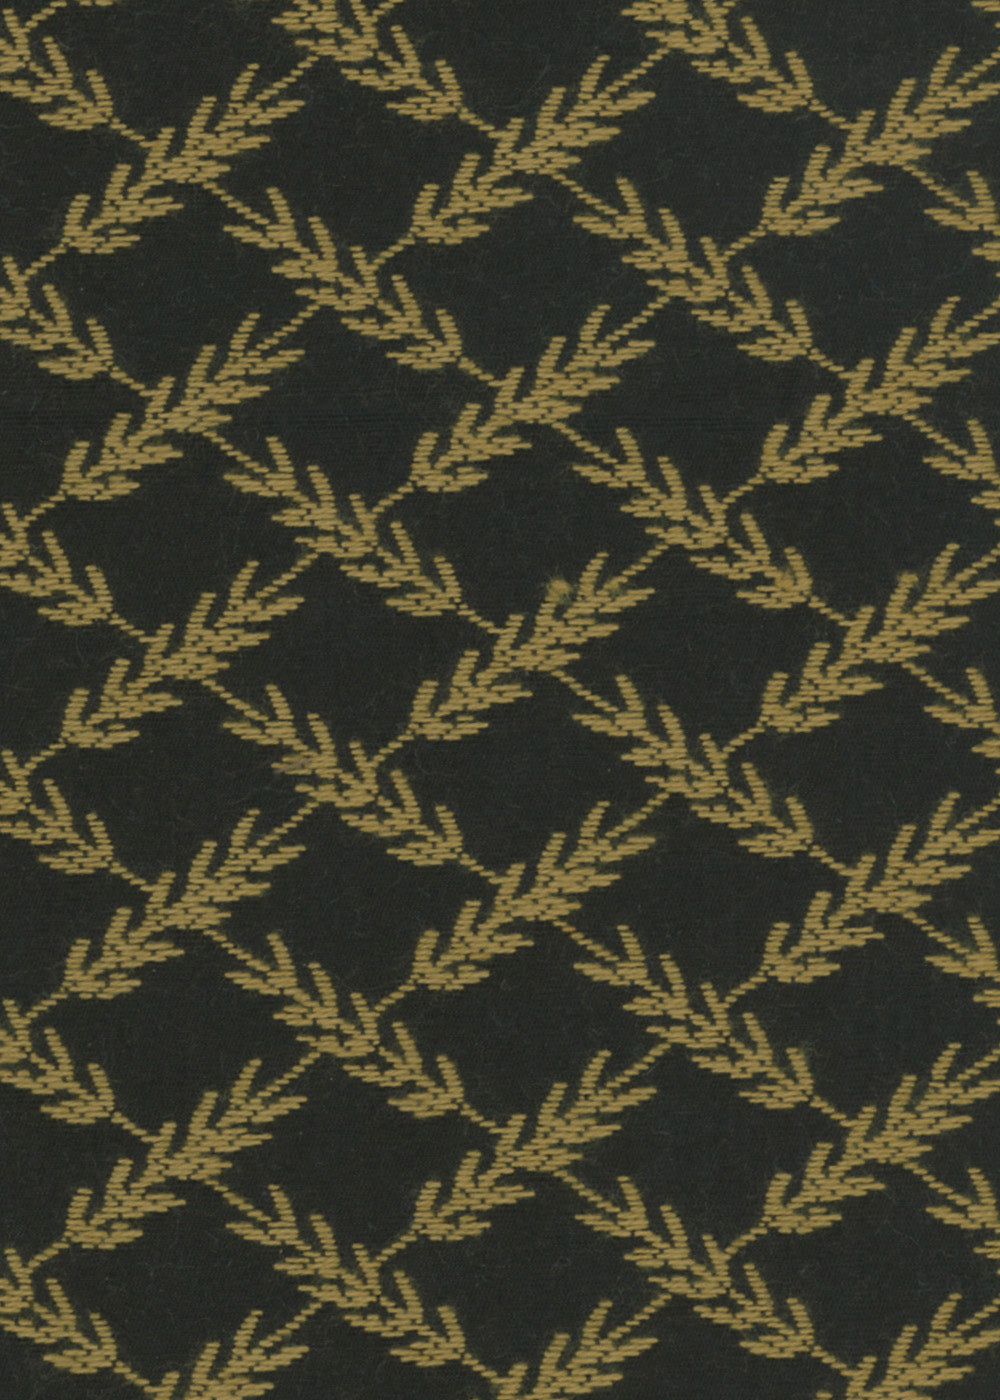 black and gold upholstery fabric with a woven pattern that looks like ears of wheat